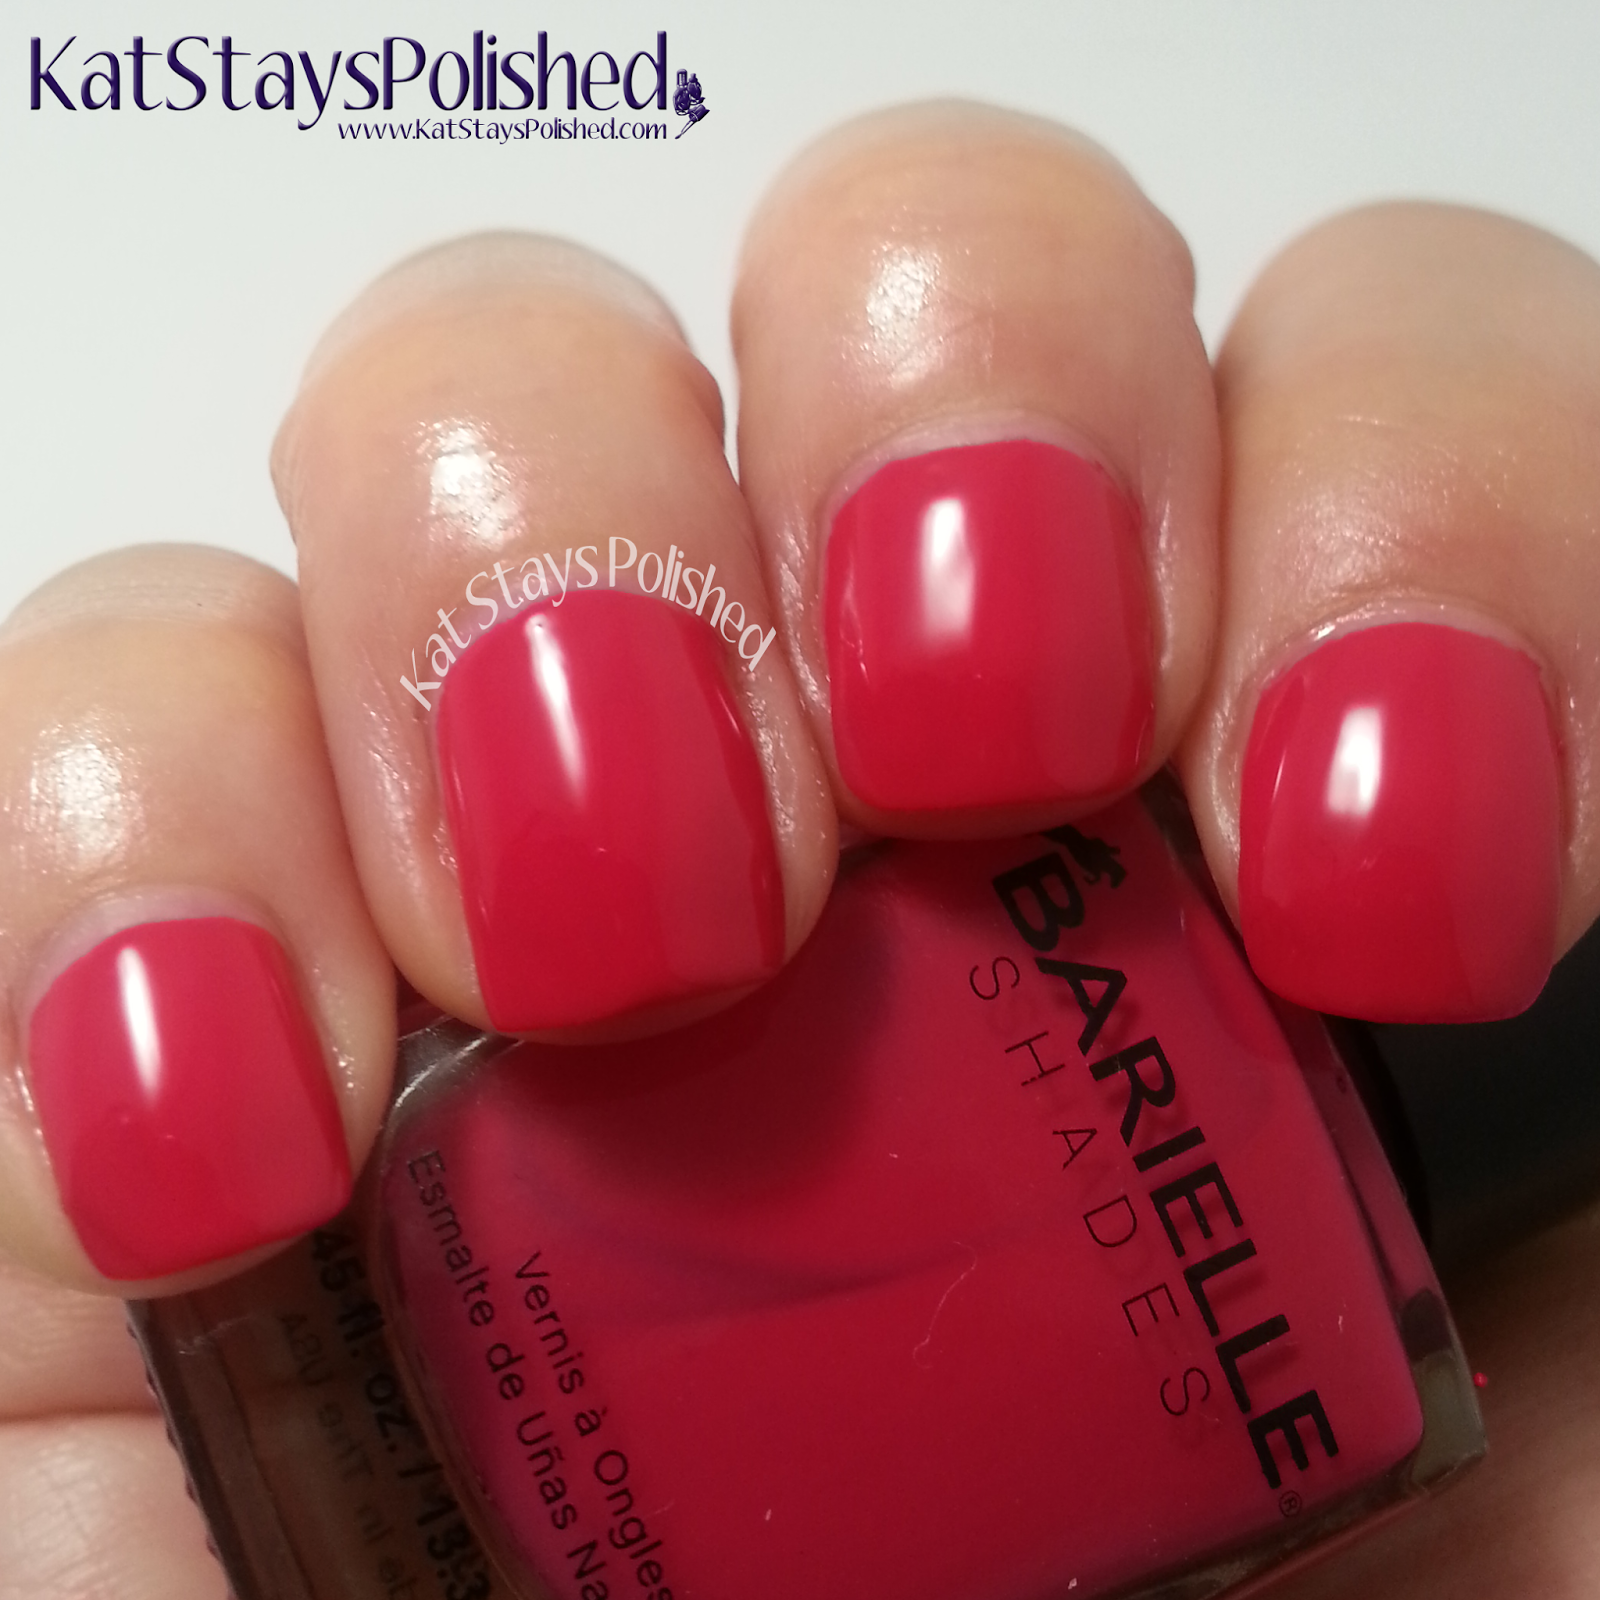 Barielle Keys Collection - Summer 2014 - Barefoot in Bermuda | Kat Stays Polished